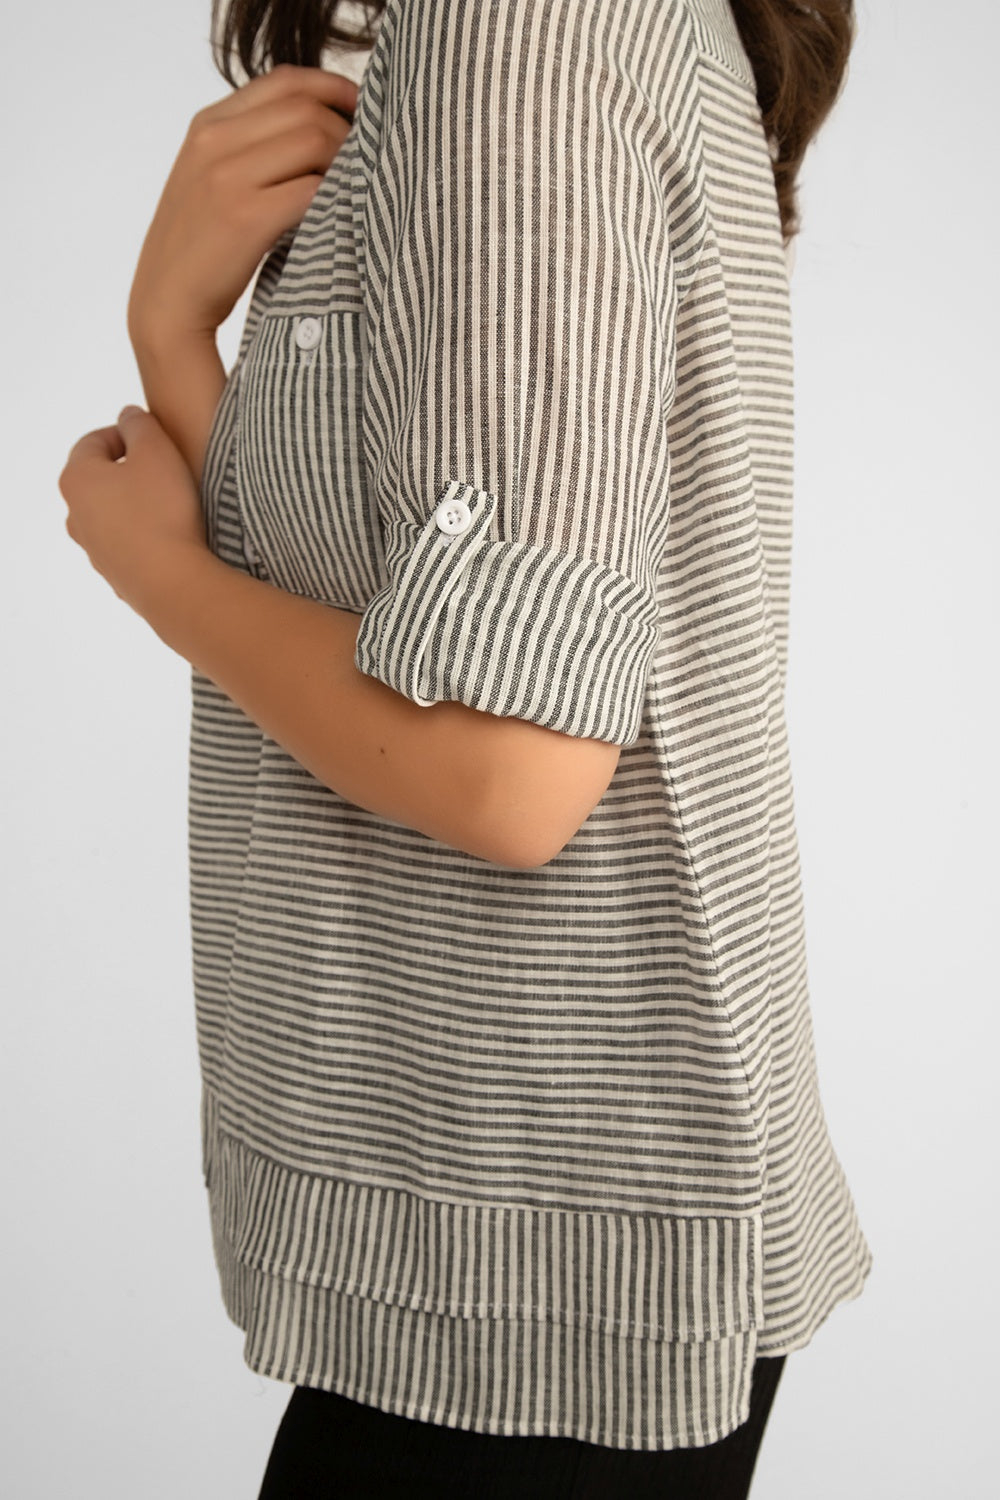 Picadilly (JM182KW) Women's 3/4 Sleeve Striped Cotton Linen Top with Half button open and two chest pockets in Grey and white fine stripes